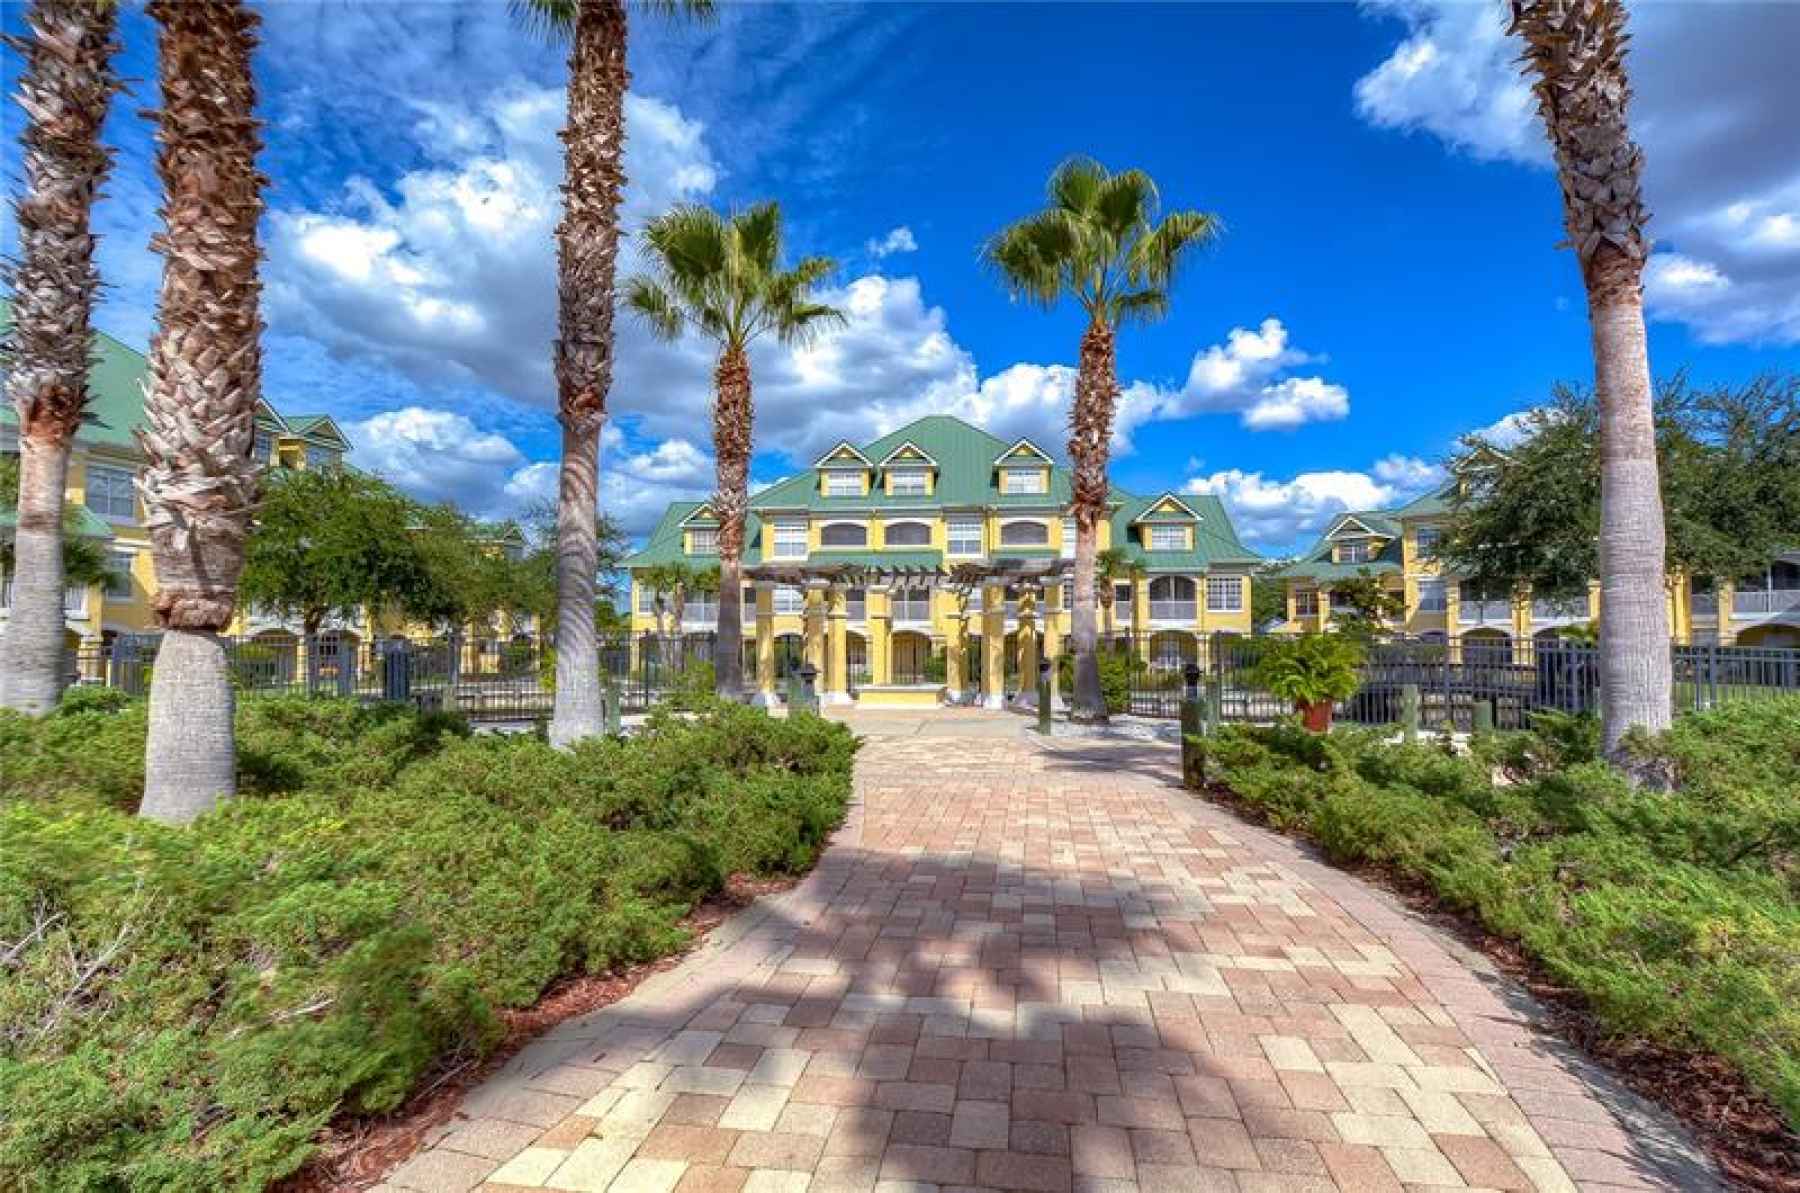 Cabana, boardwalk, docks, and waterfront access to the desirable Tampa Bay!